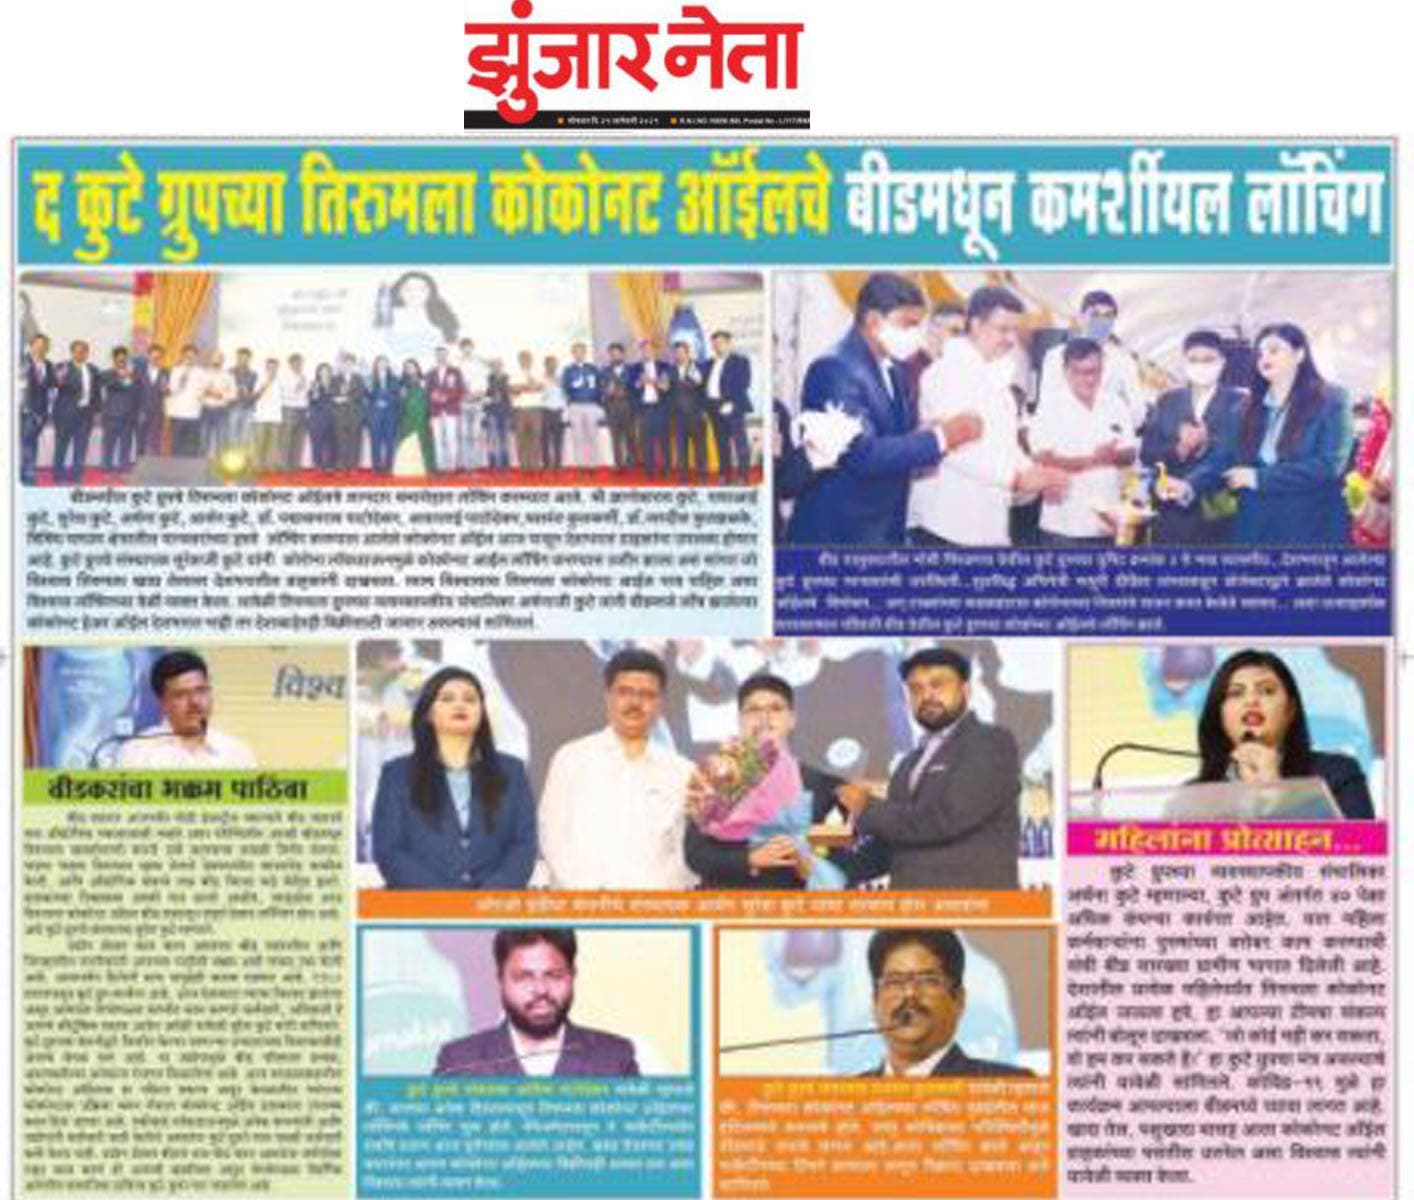 news published in daily zunjarneta about product launching of Tirumalaa Coconut Oil By The Kute Group